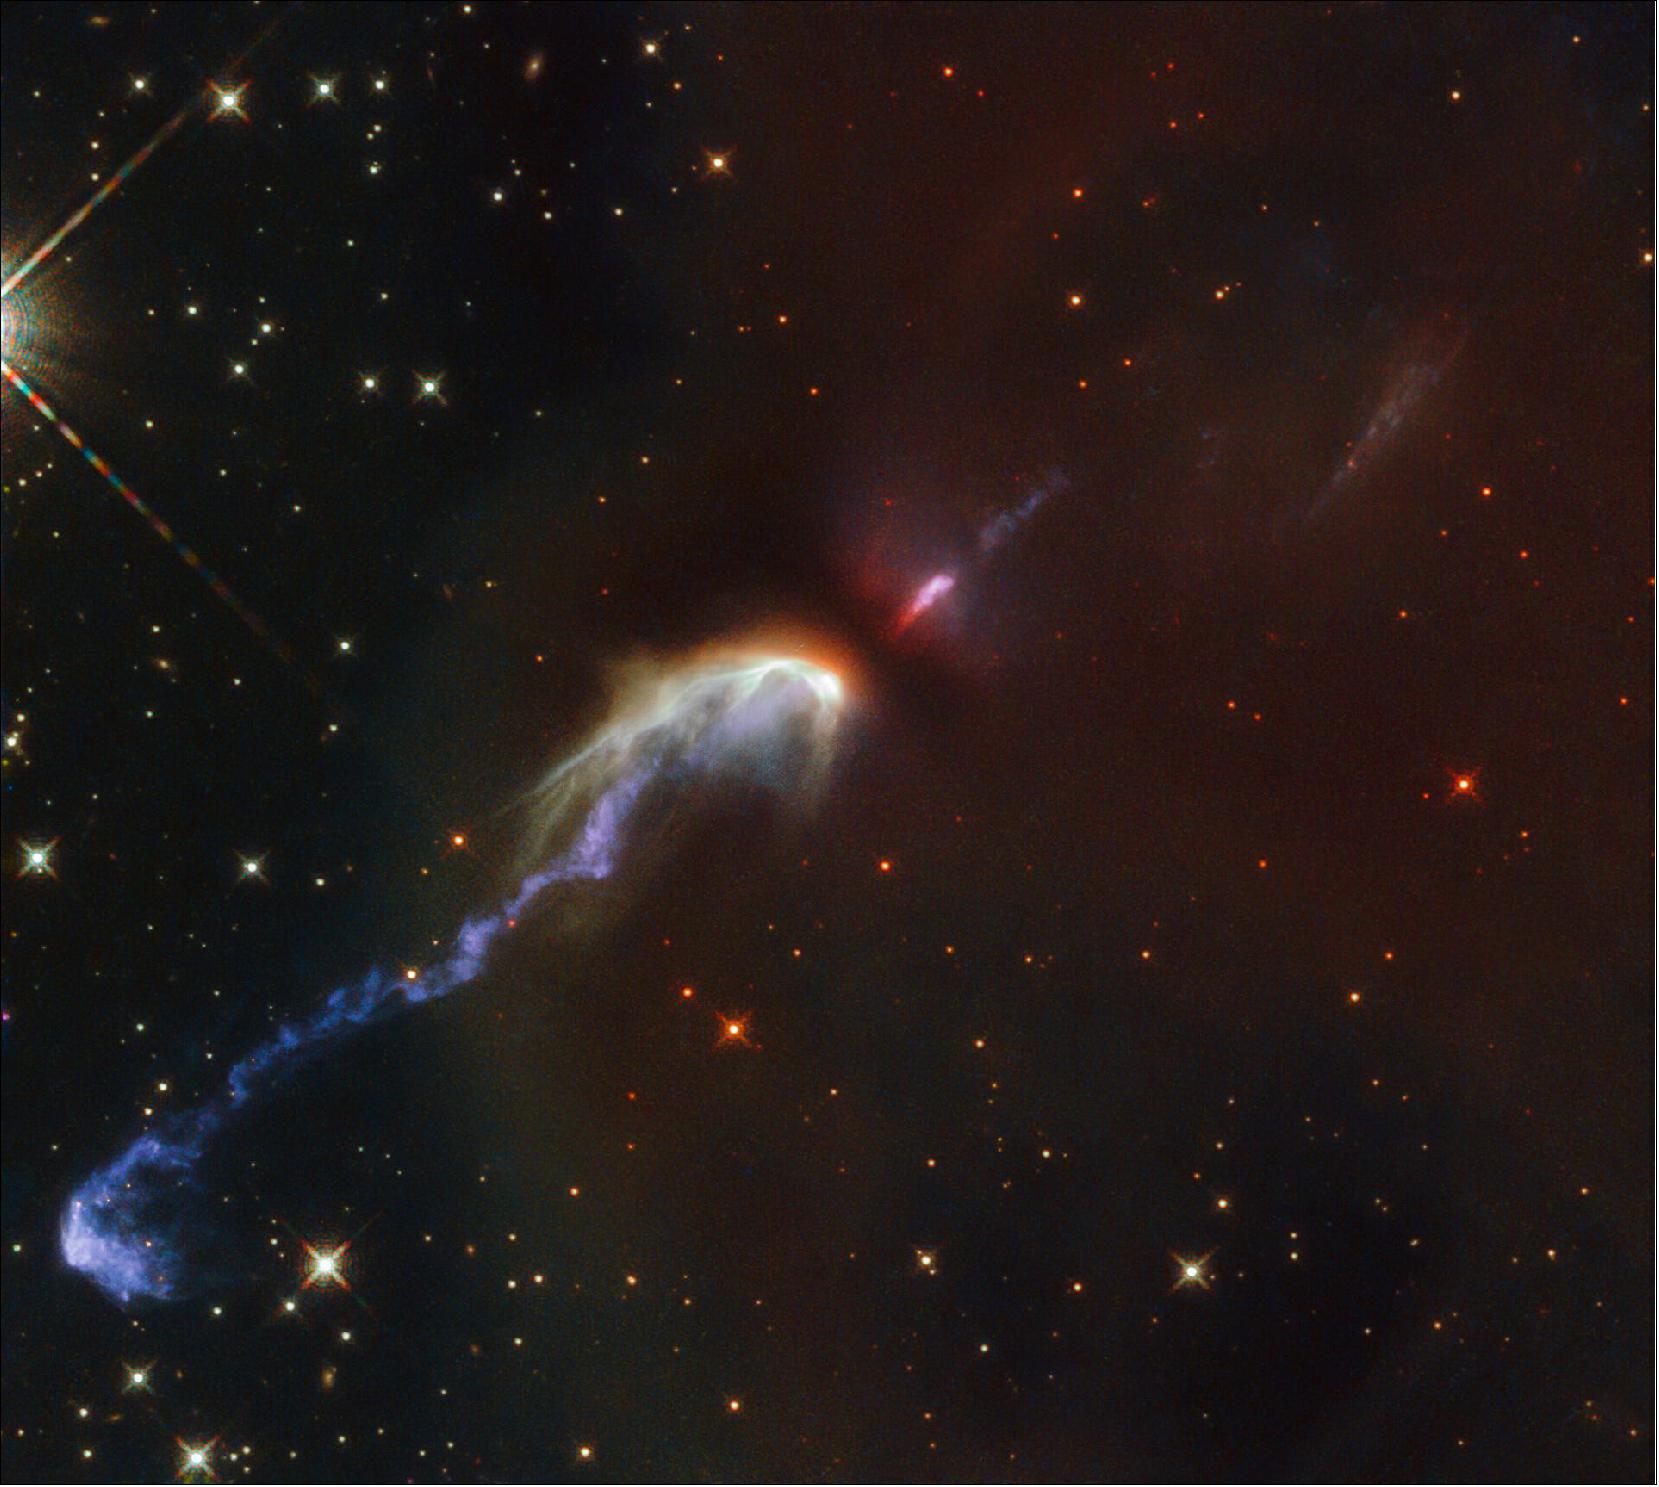 Figure 115: Herbig-Haro objects are some of the rarer sights in the night sky, taking the form of thin spindly jets of matter floating amongst the surrounding gas and stars. The two Herbig-Haro objects catalogued as HH46 and HH47, seen in this image taken with the NASA/ESA Hubble Space Telescope, were spotted in the constellation of Vela (The Sails), at a distance of over 1400 light-years from Earth. Prior to its discovery in 1977 by the American astronomer R. D. Schwartz, the exact mechanism by which these multi-colored objects formed was unknown (image credit: ESA/Hubble & NASA, B. Nisini)